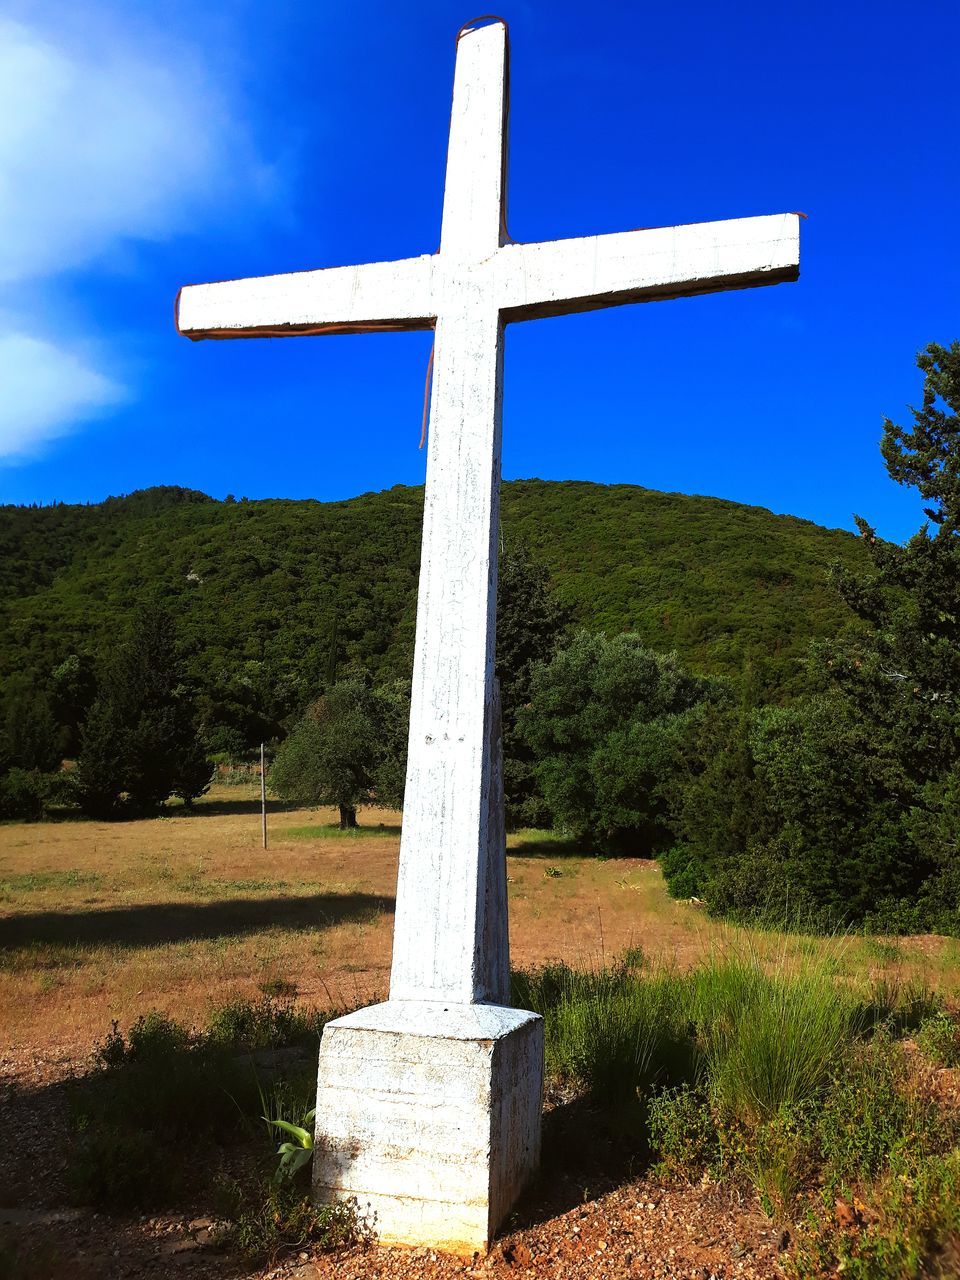 VIEW OF CROSS ON FIELD AGAINST SKY